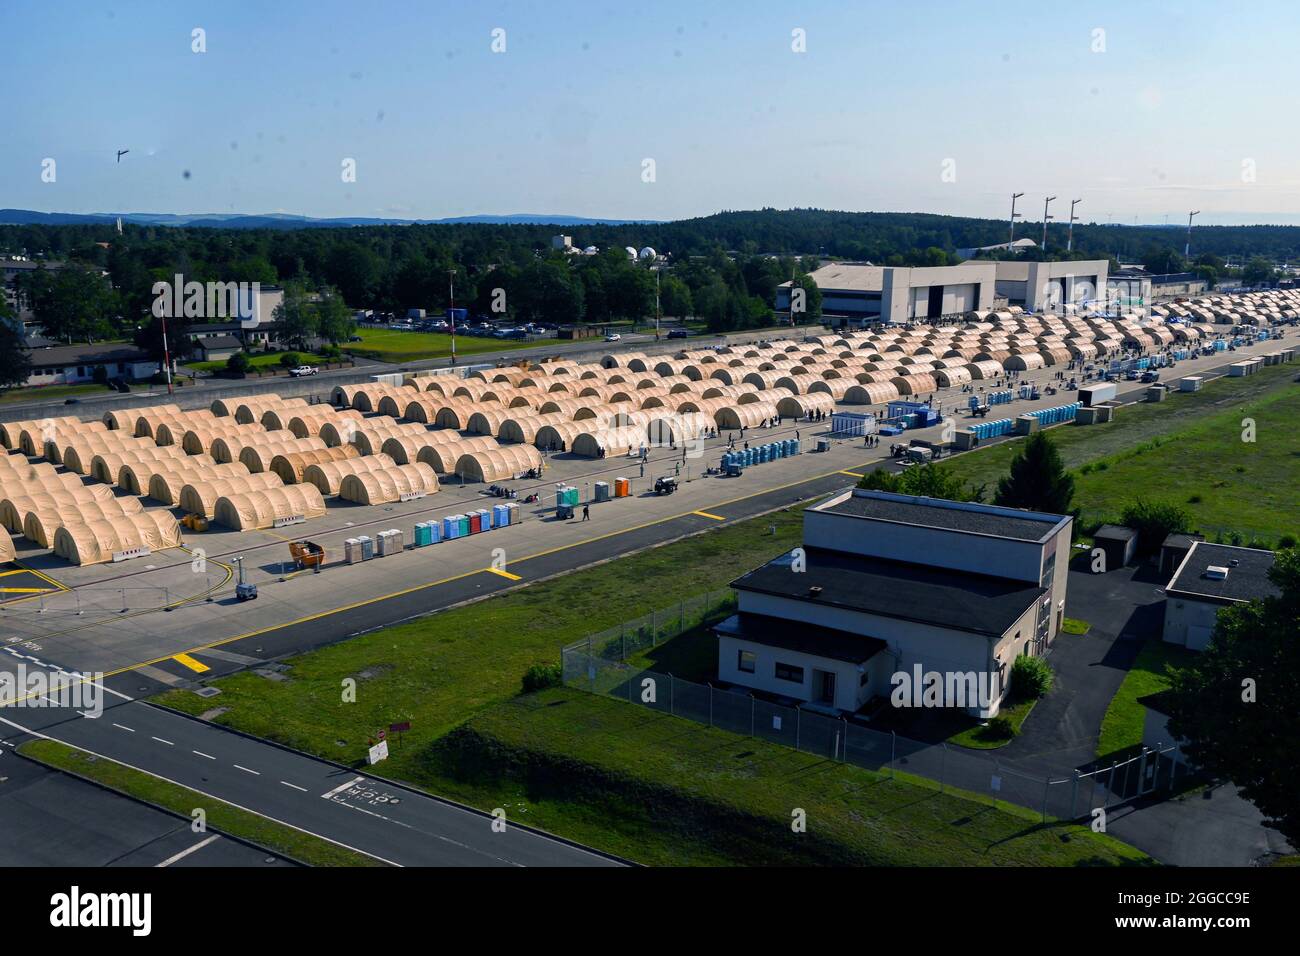 Pods are established for evacuees at Ramstein Air Base, Germany, August 24, 2021. Military members established temporary lodging for evacuees from Afghanistan in support of Operation Allies Refuge. Mandatory Credit: Jan K. Valle/US Air Force via CNP Stock Photo